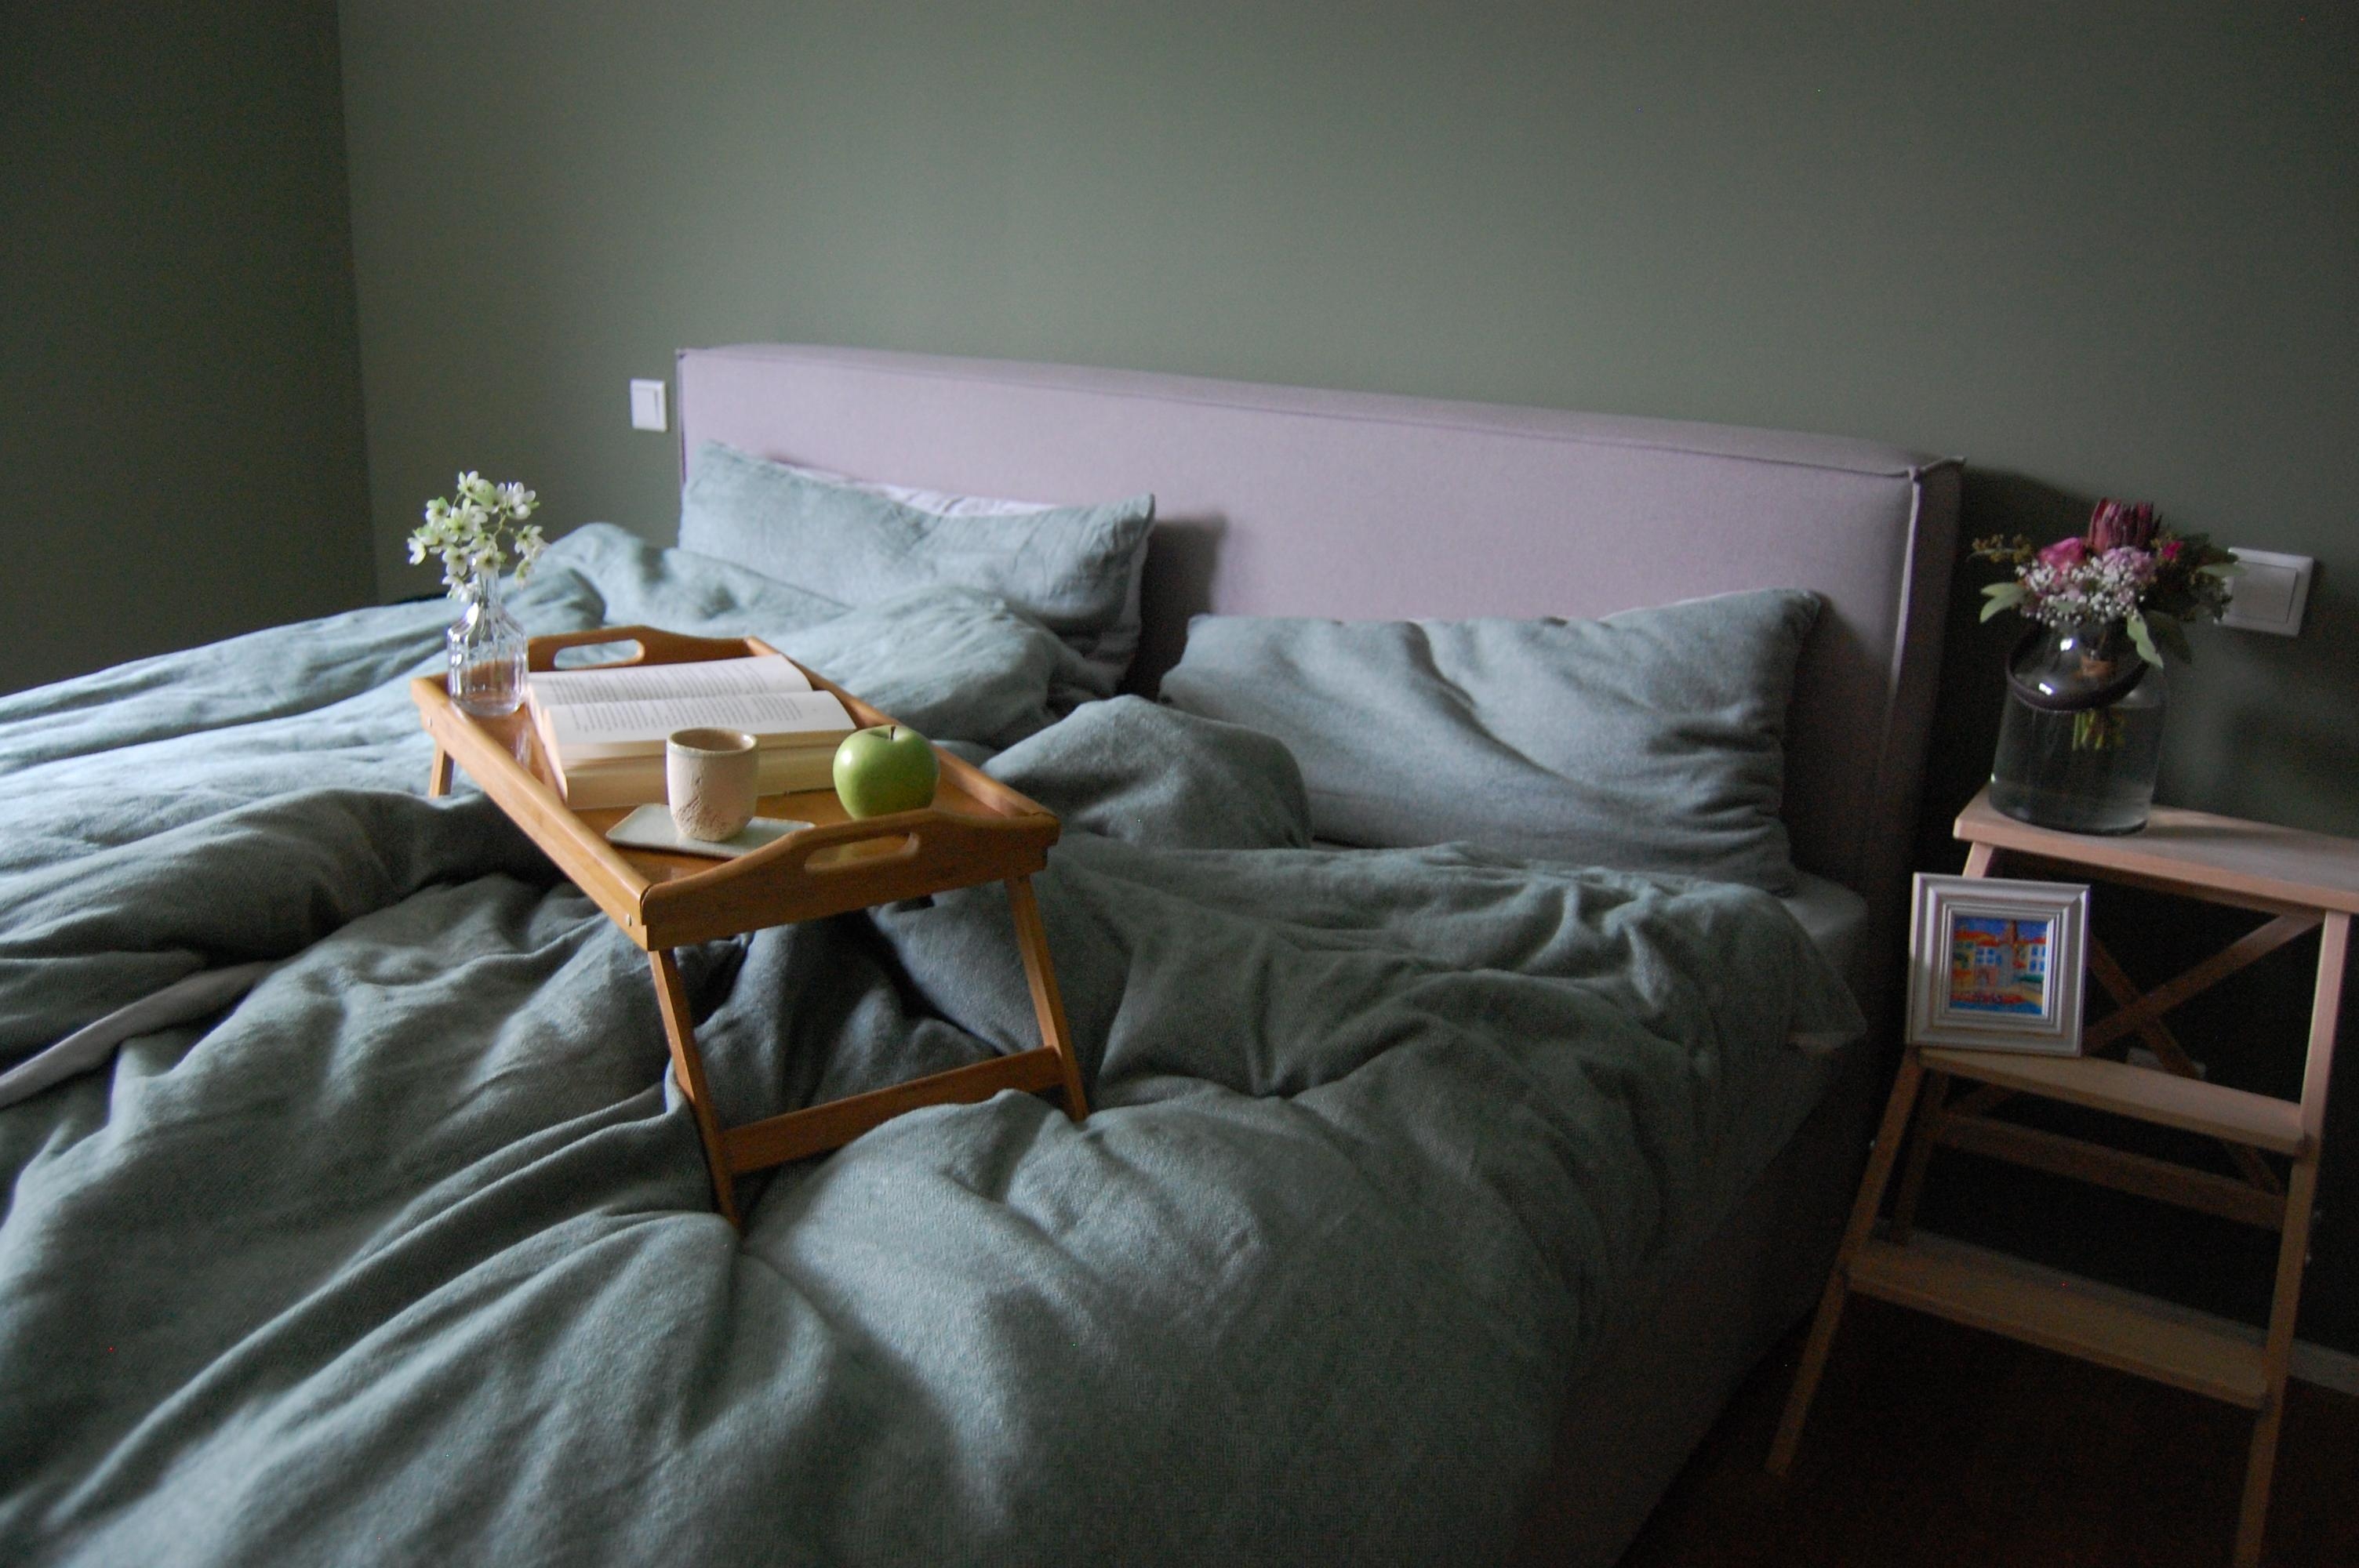 Happiness is.. Clean sheets and a freshly made bed. #greenliving #livingchallenge #schlafzimmer  